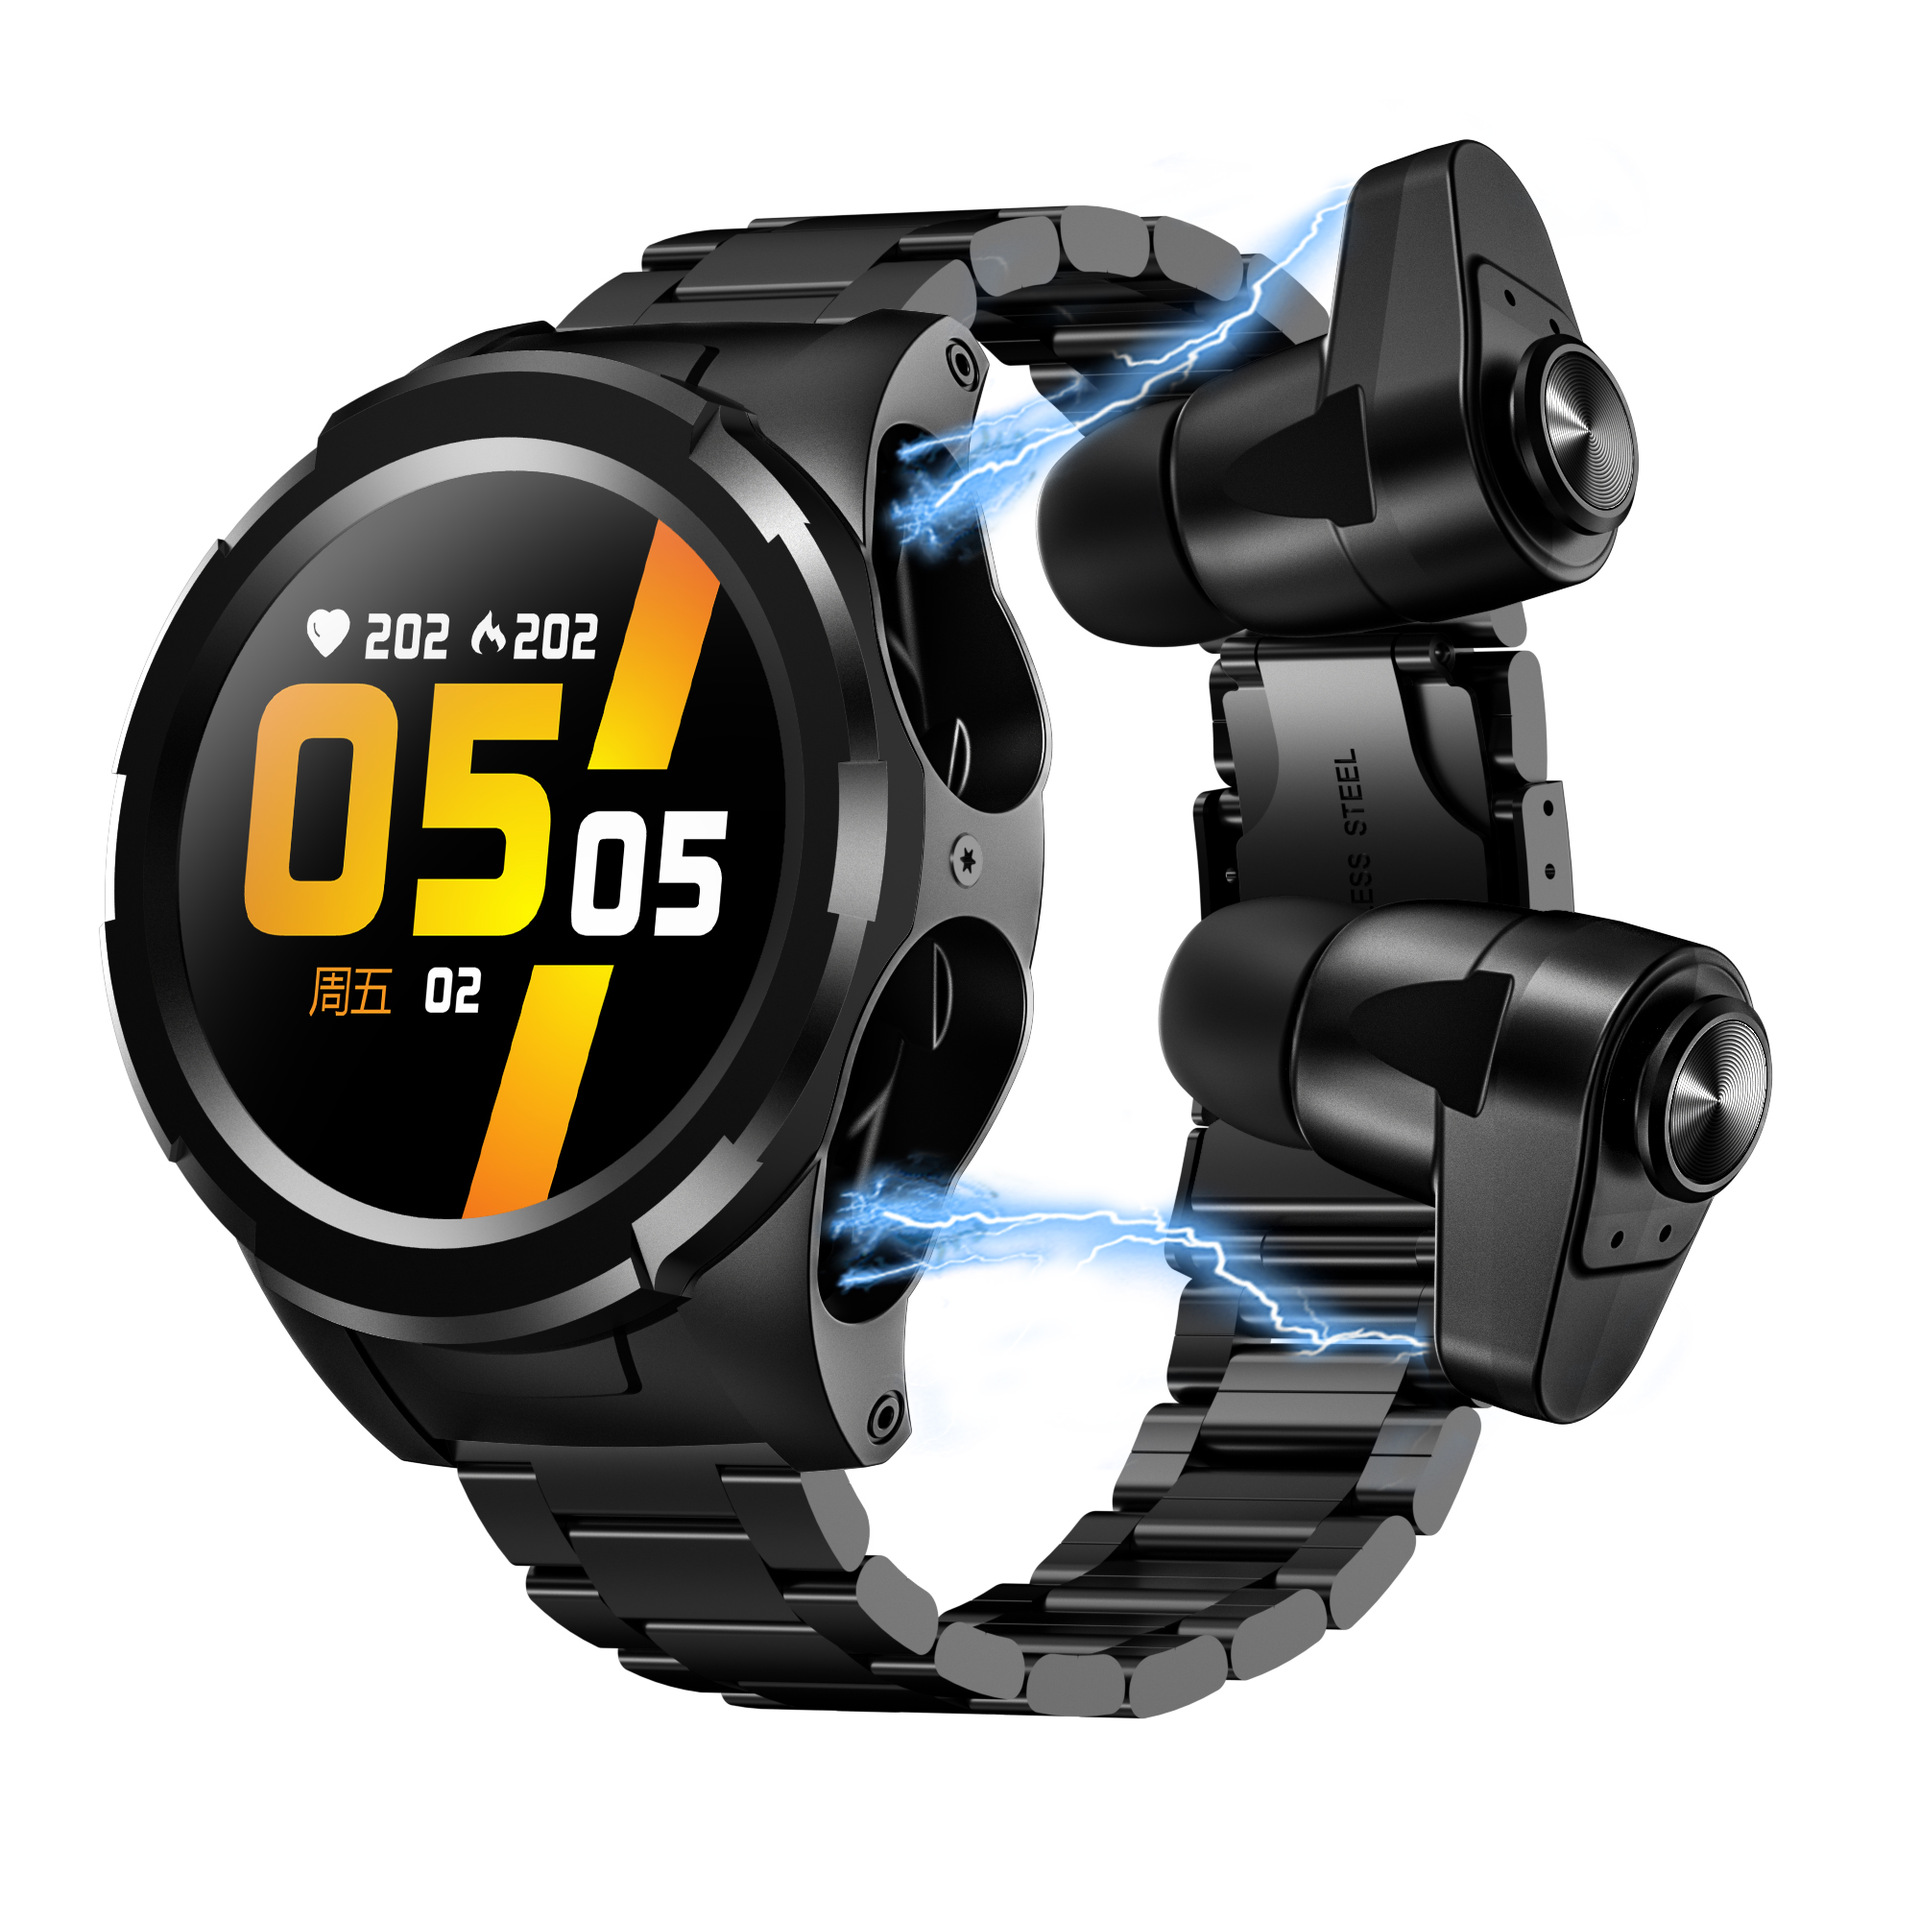 Cross border Selling New products S201 Upgraded version F6 intelligence watch Bluetooth headset Two-in-one TWS5.0